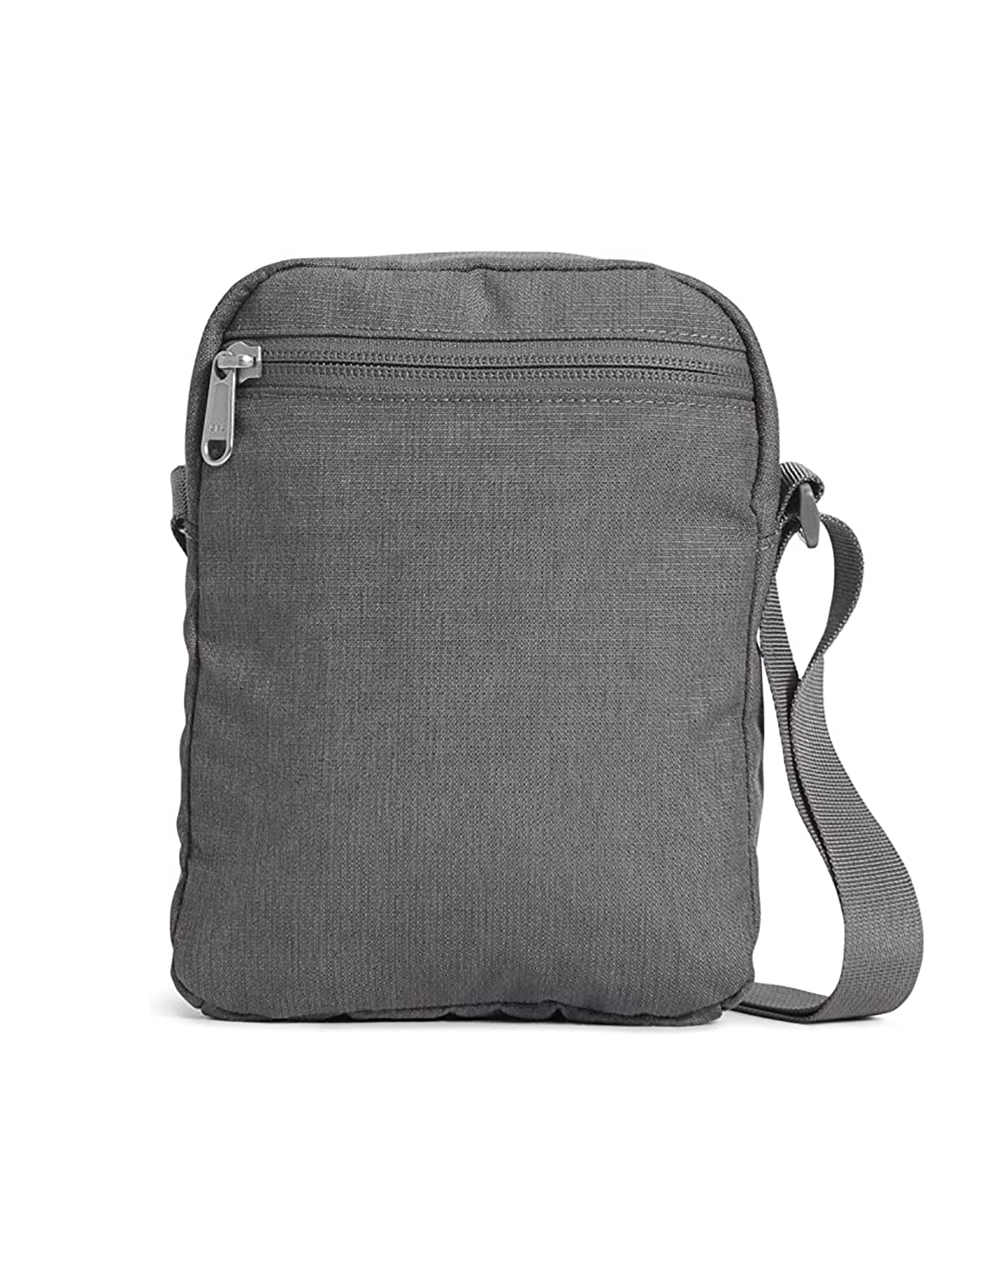 THE NORTH FACE Jester Crossbody Bag - GRAY | Tillys